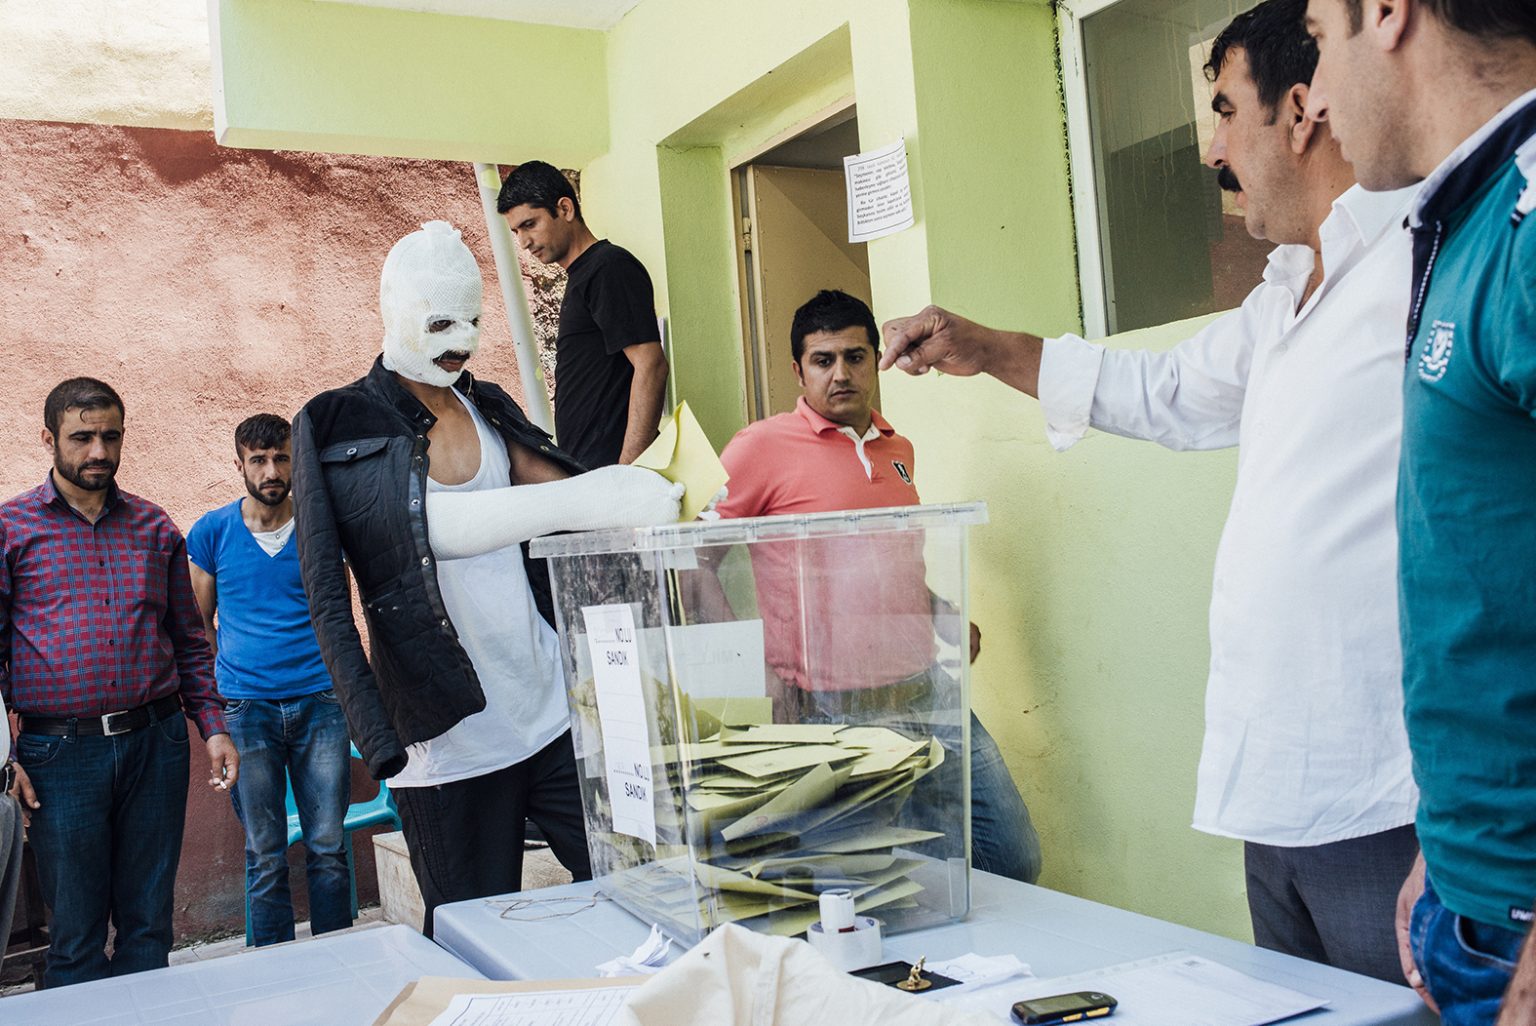 TURKEY. Diyarbakir, June 2015 – Huseyin Toprak casts his vote at a polling station, two days after he was wounded during a bomb attack on the pre-election rally of the pro-Kurdish Peoples' Democratic Party (HDP) where 4 people lost their lives.TURCHIA. Diyarbakir, June 2015 – Huseyin Toprak in un seggio elettorale, due giorni dopo un'esplosione alla manifestazione pre-elettorale del Partito Democratico dei Popoli pro-curdi (HDP) dove 4 persone hanno perso la vita.